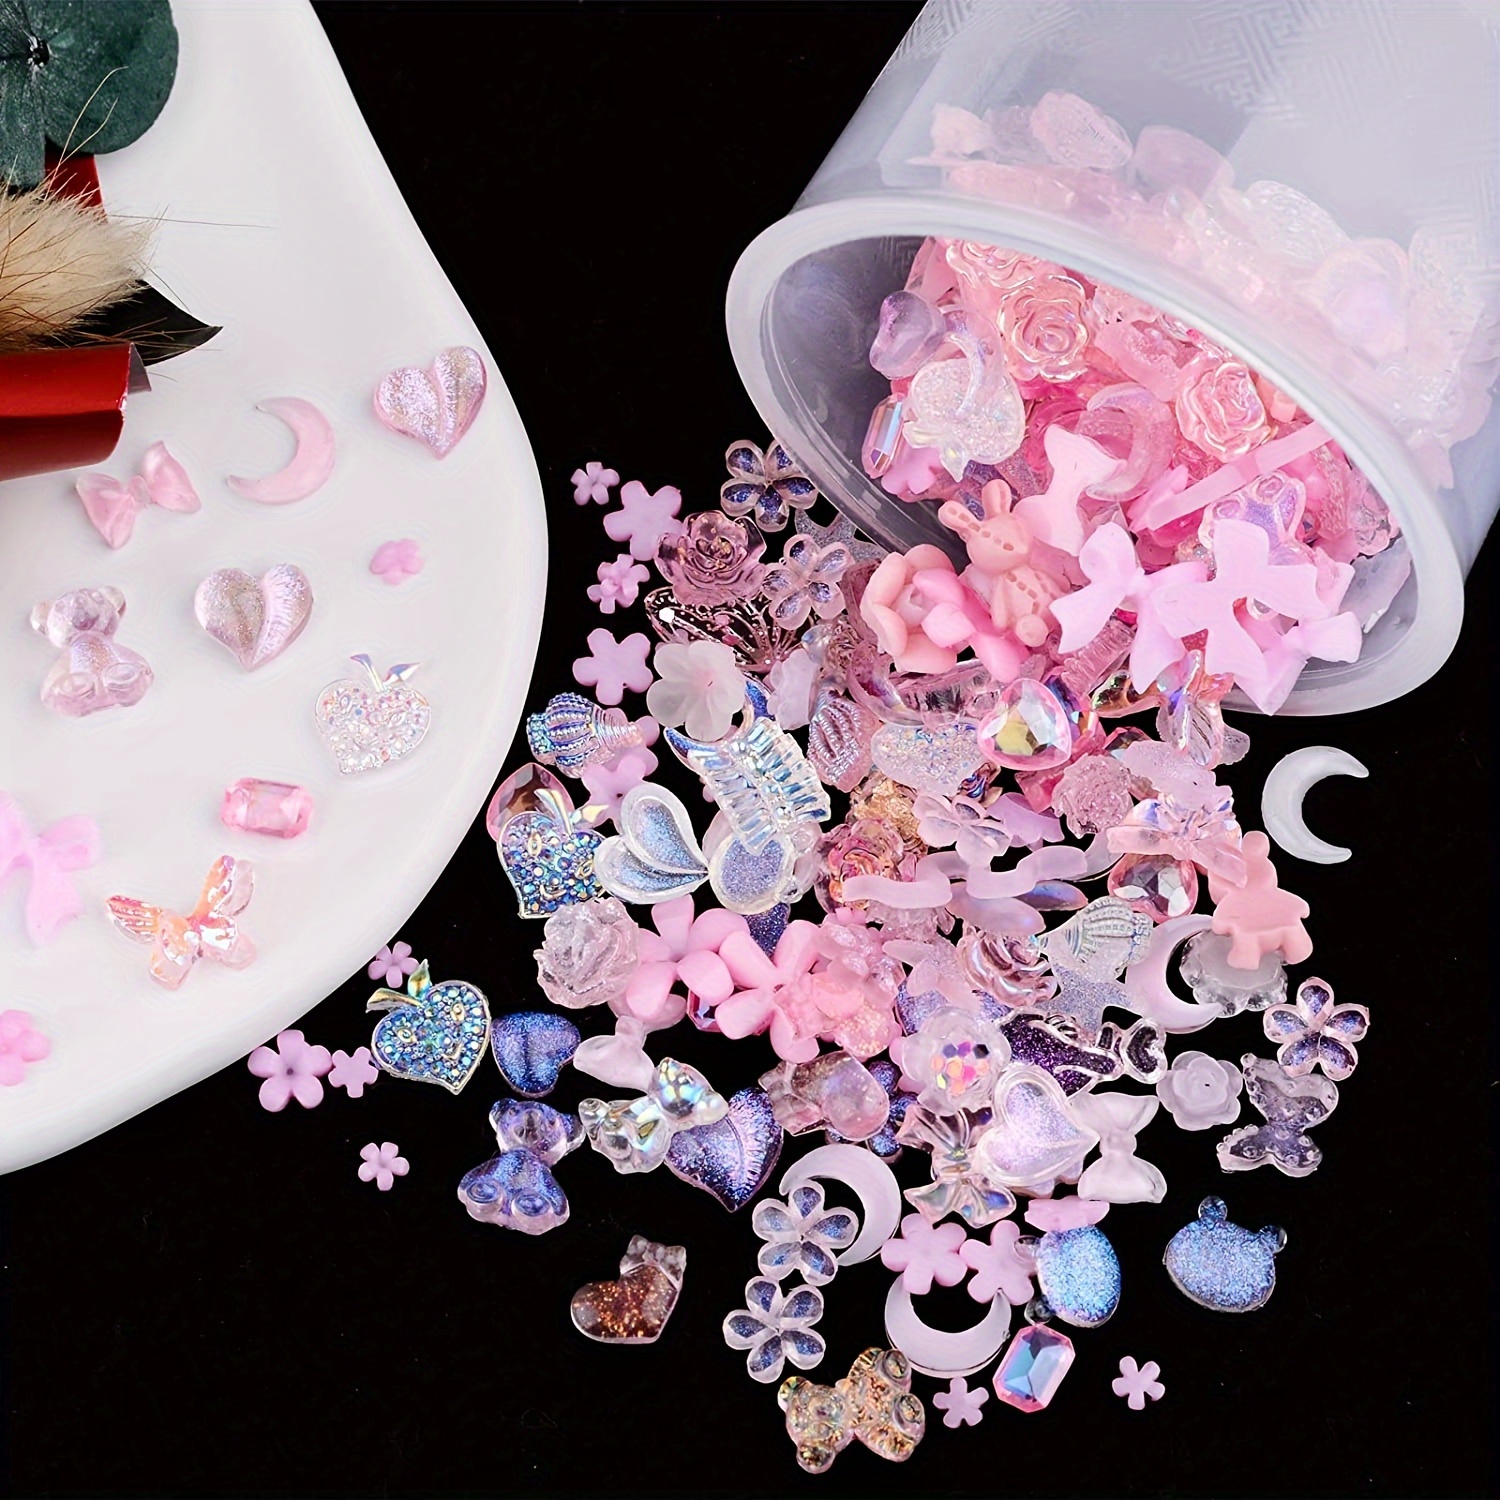 

100 Pieces 3d Resin Butterfly Bear Nail Charms Rose Flower Peach Skirt Bow Deer Snake Rabbit Animal Shaped Nail Art Rhinestones Faux Pearls For Nail Art Decoration Making Craft